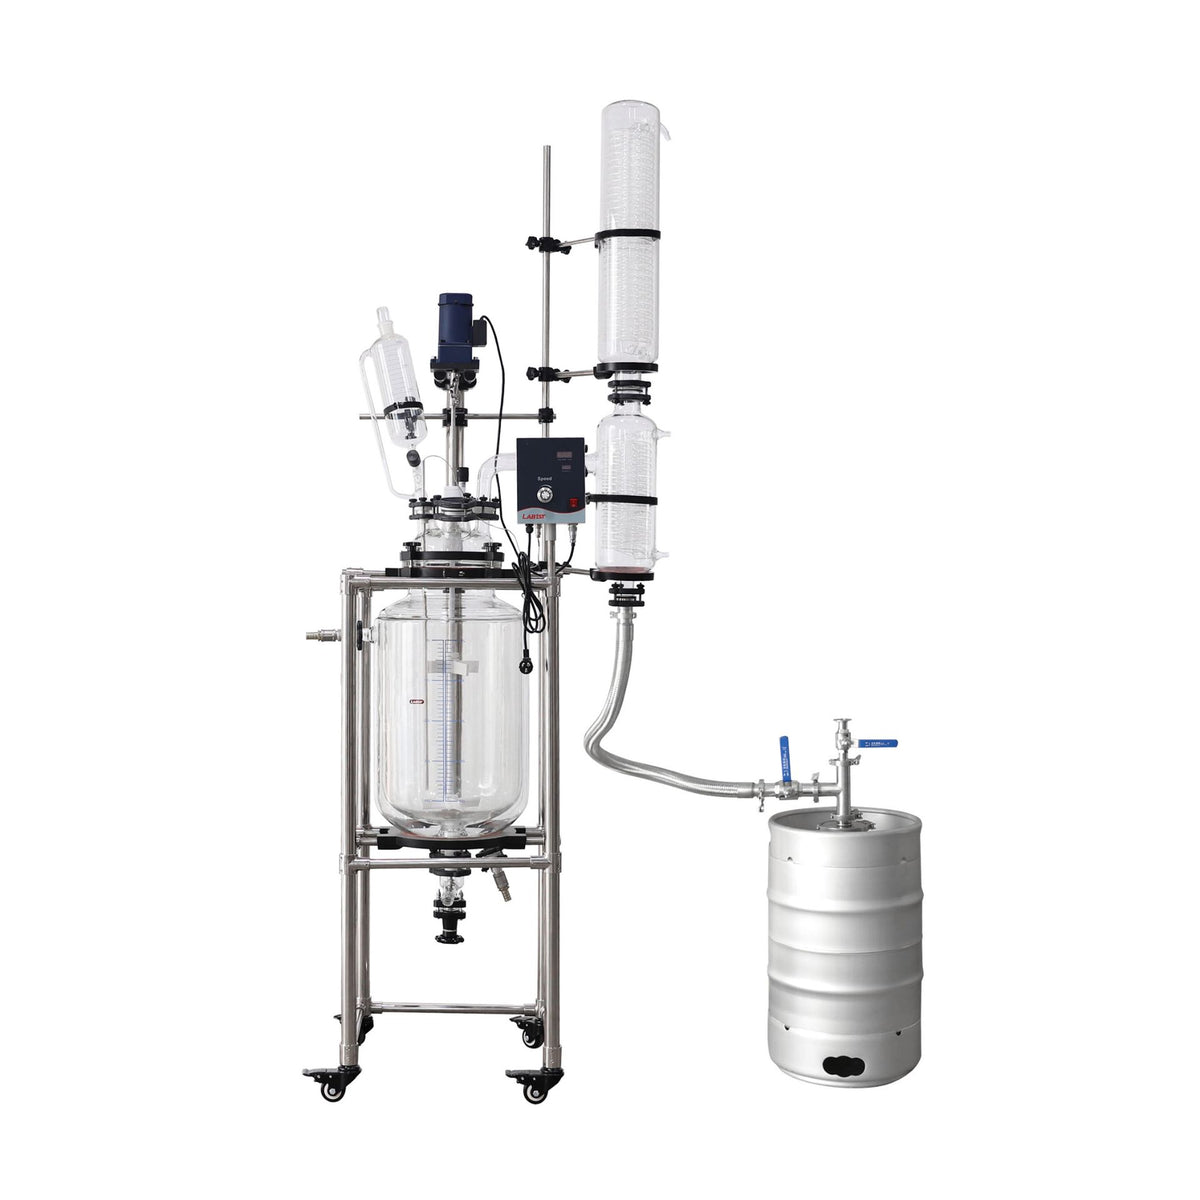 150L Jacketed Glass Evaporation Reactor Vessel Chemistry with Digital Display